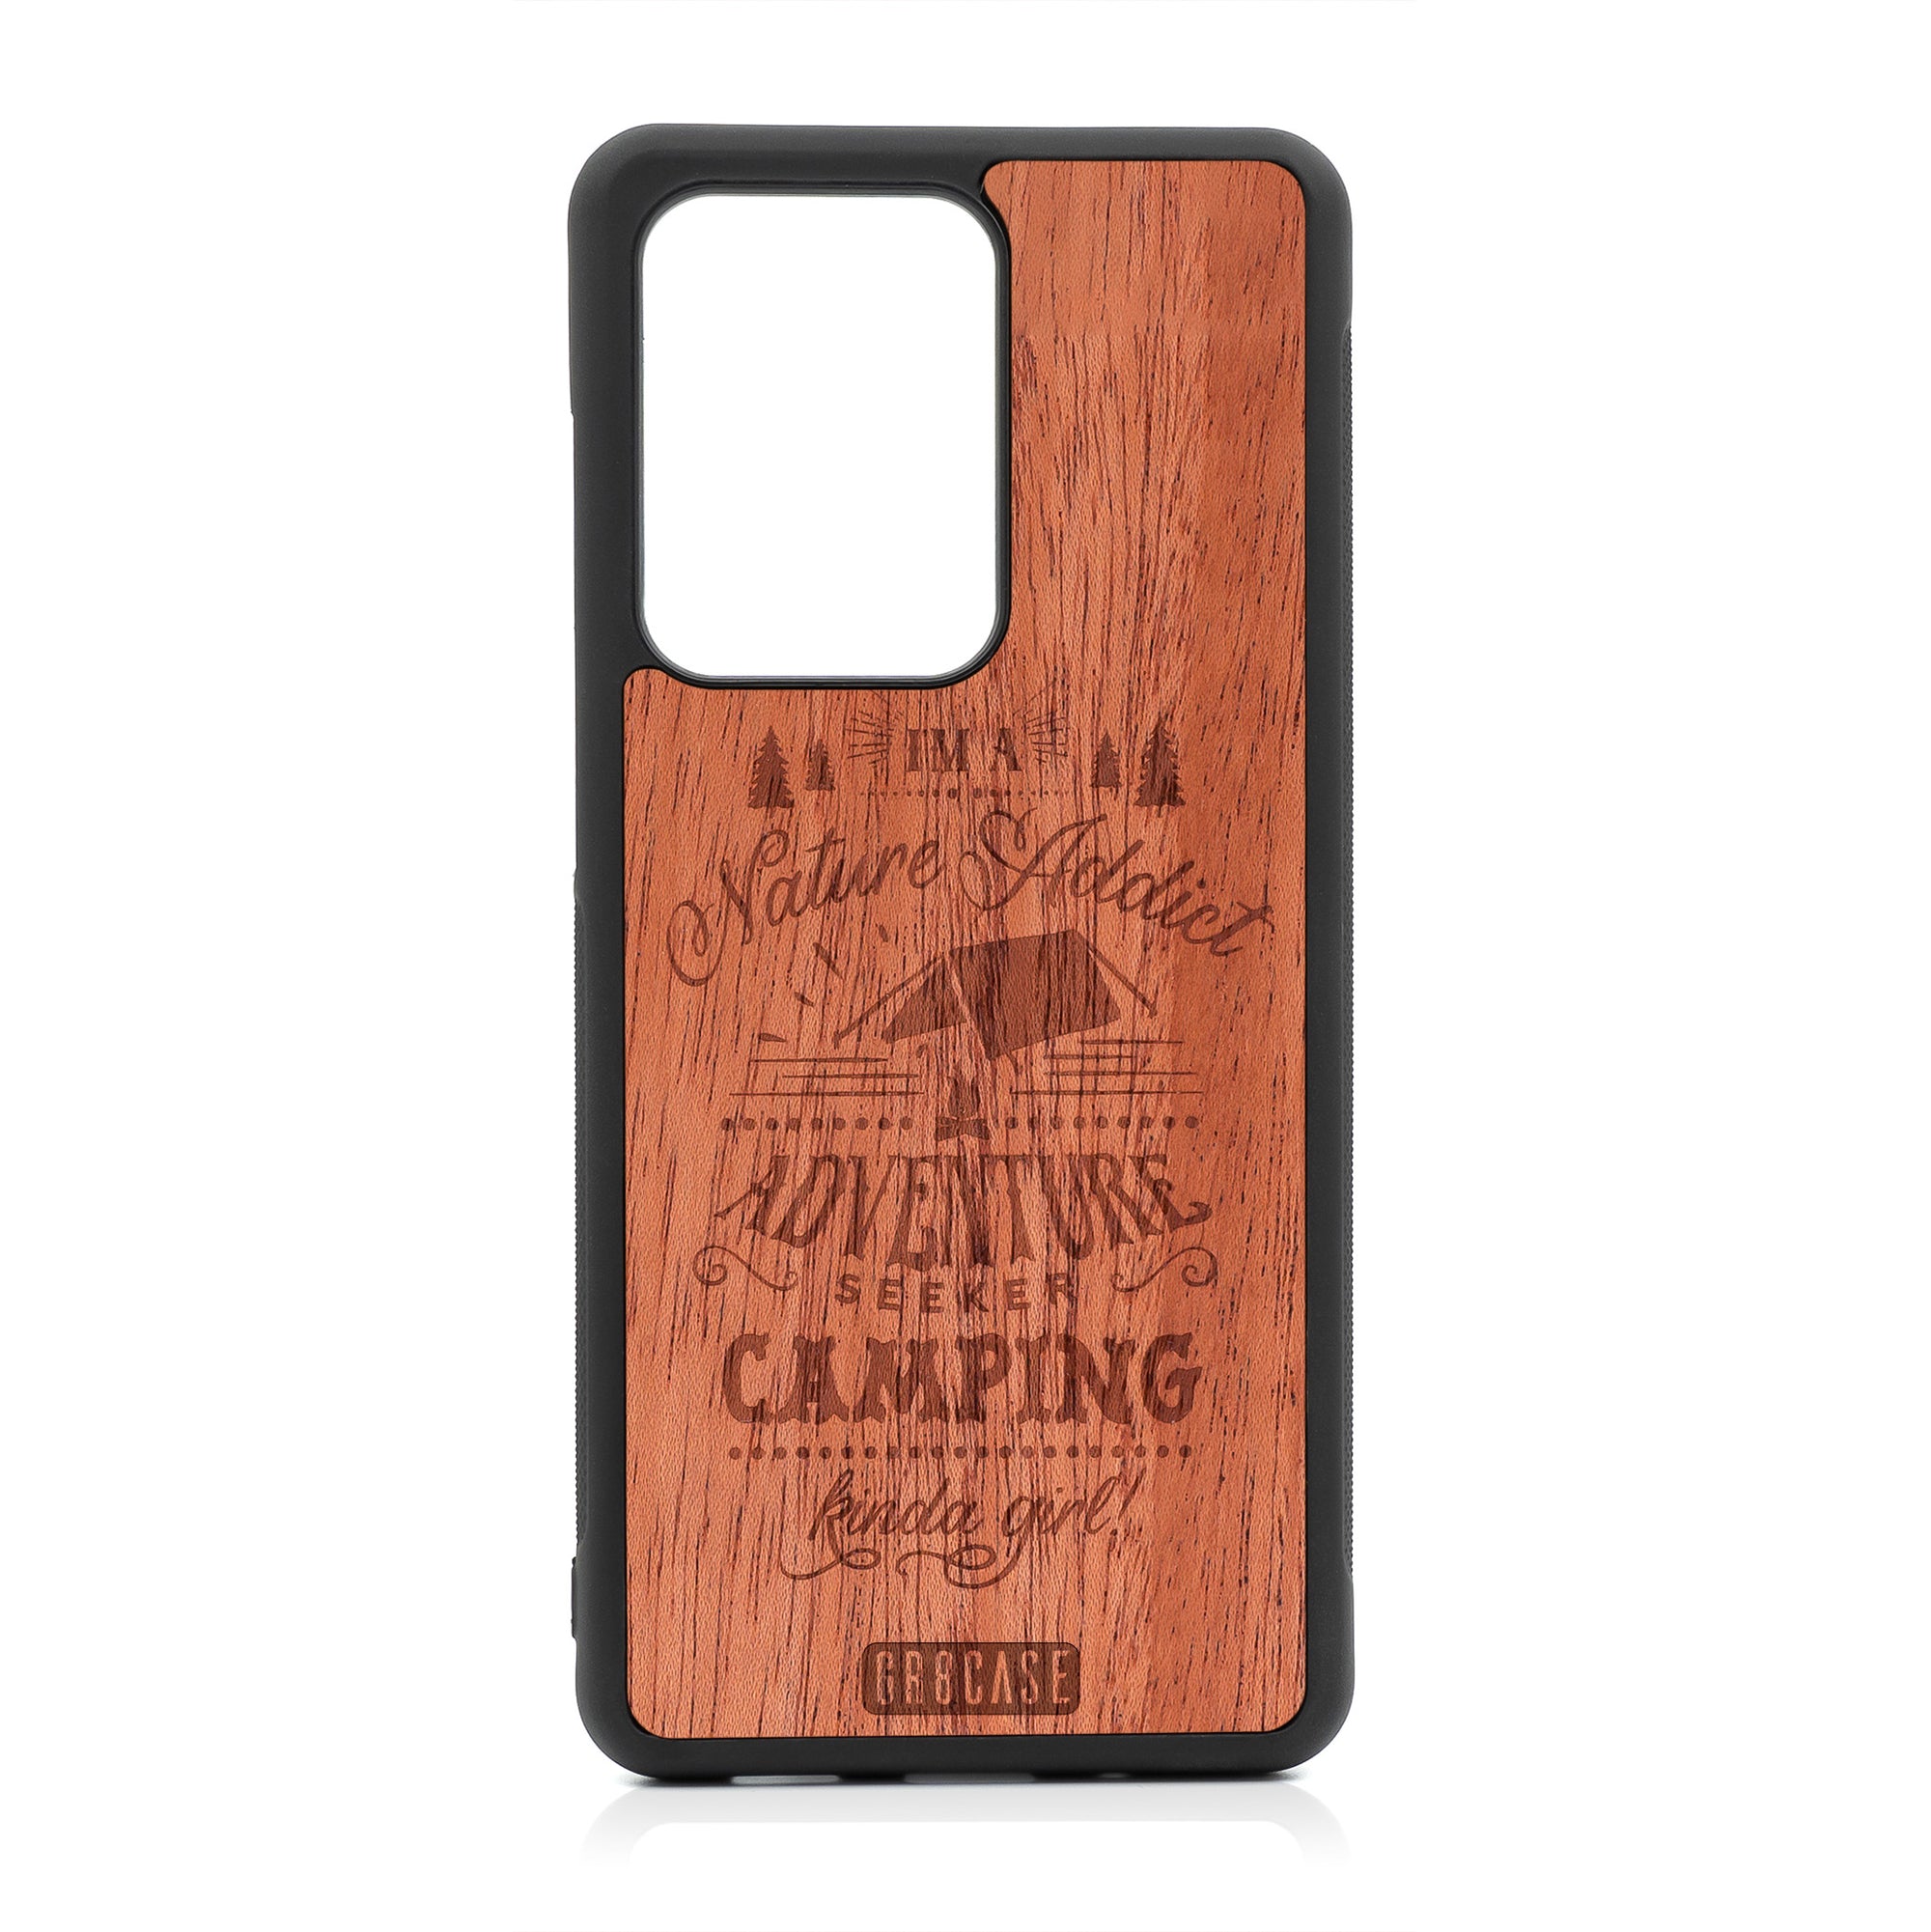 I'm A Nature Addict Adventure Seeker Camping Kinda Girl Design Wood Case For Samsung Galaxy S20 Ultra by GR8CASE